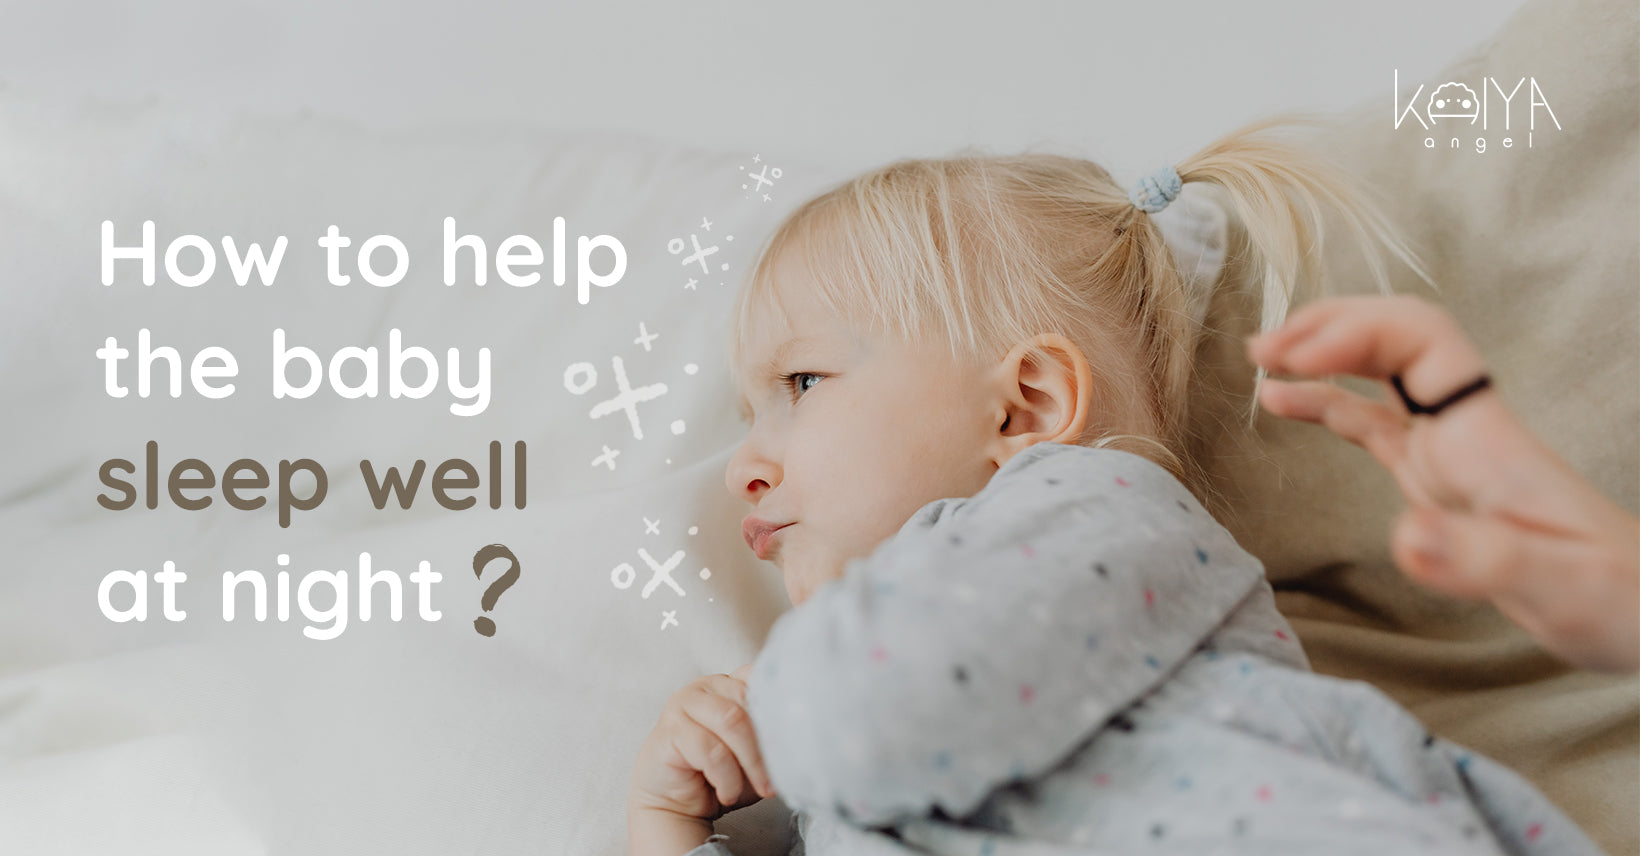 How to help the baby sleep well at night?